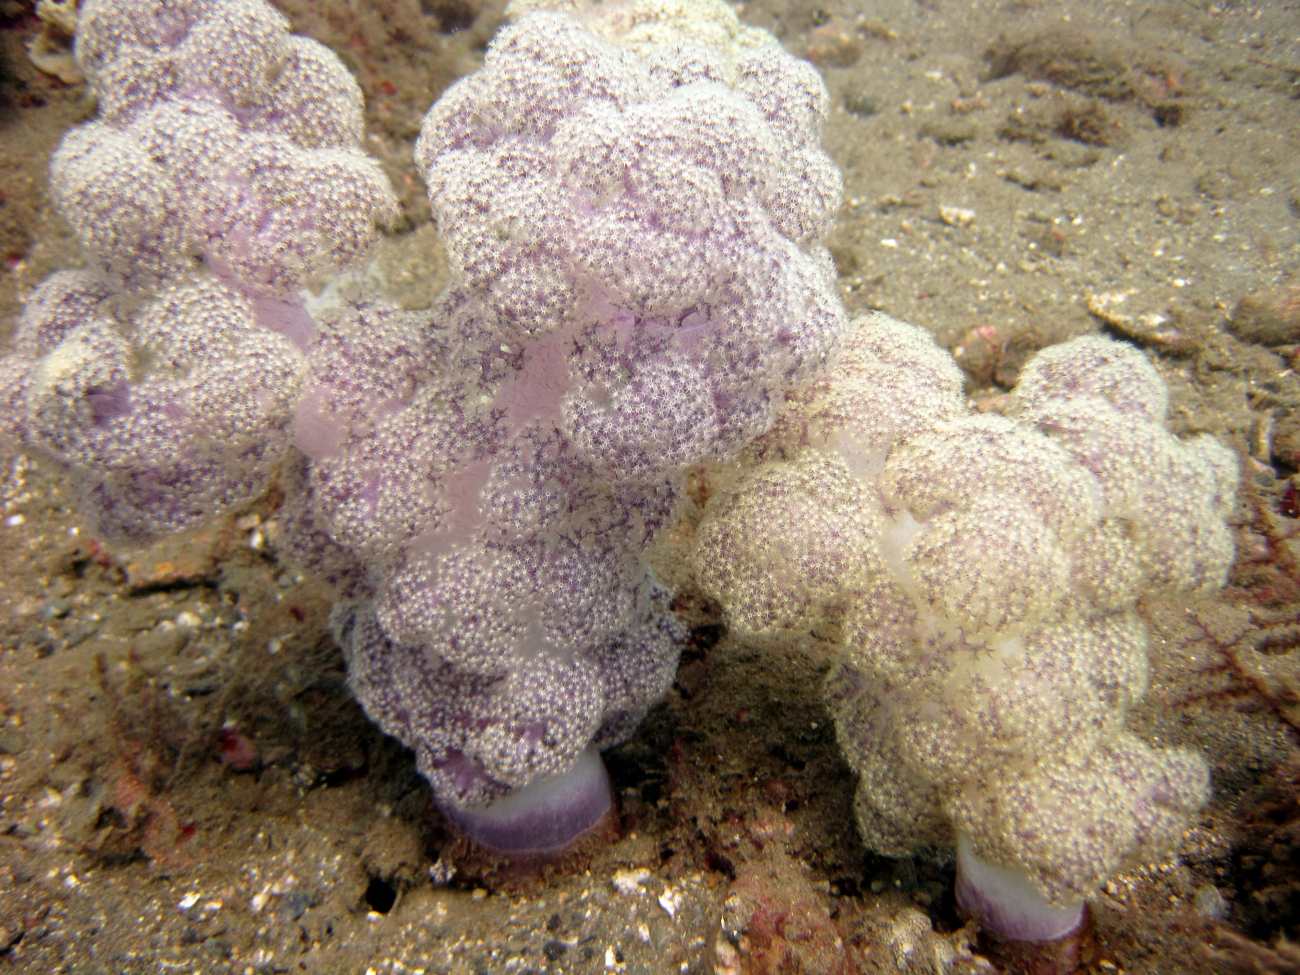 A soft whitish purple coral